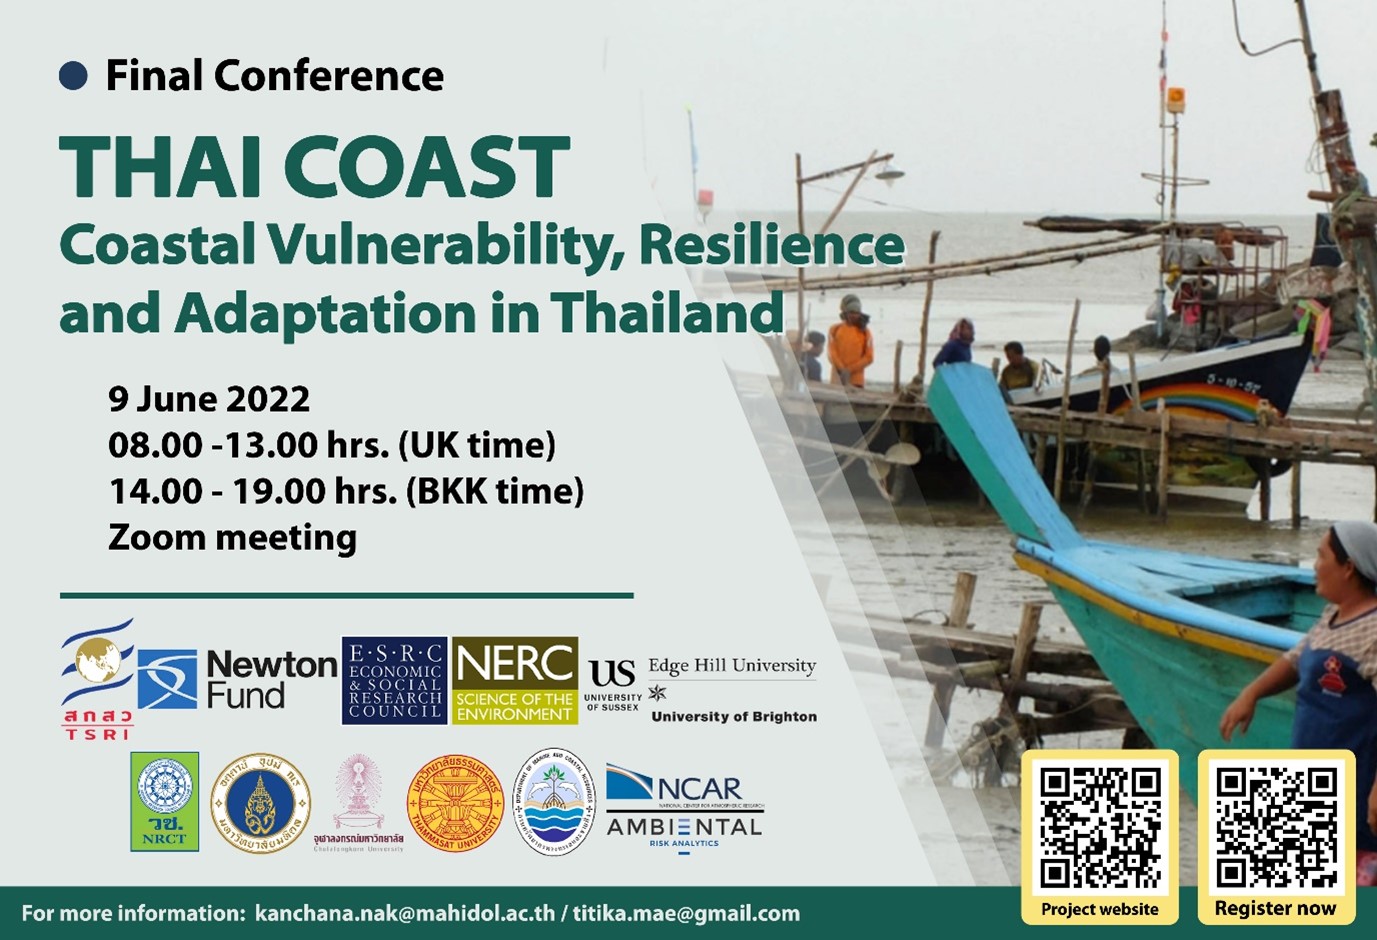 The Final Conference of the Thai Coast Project